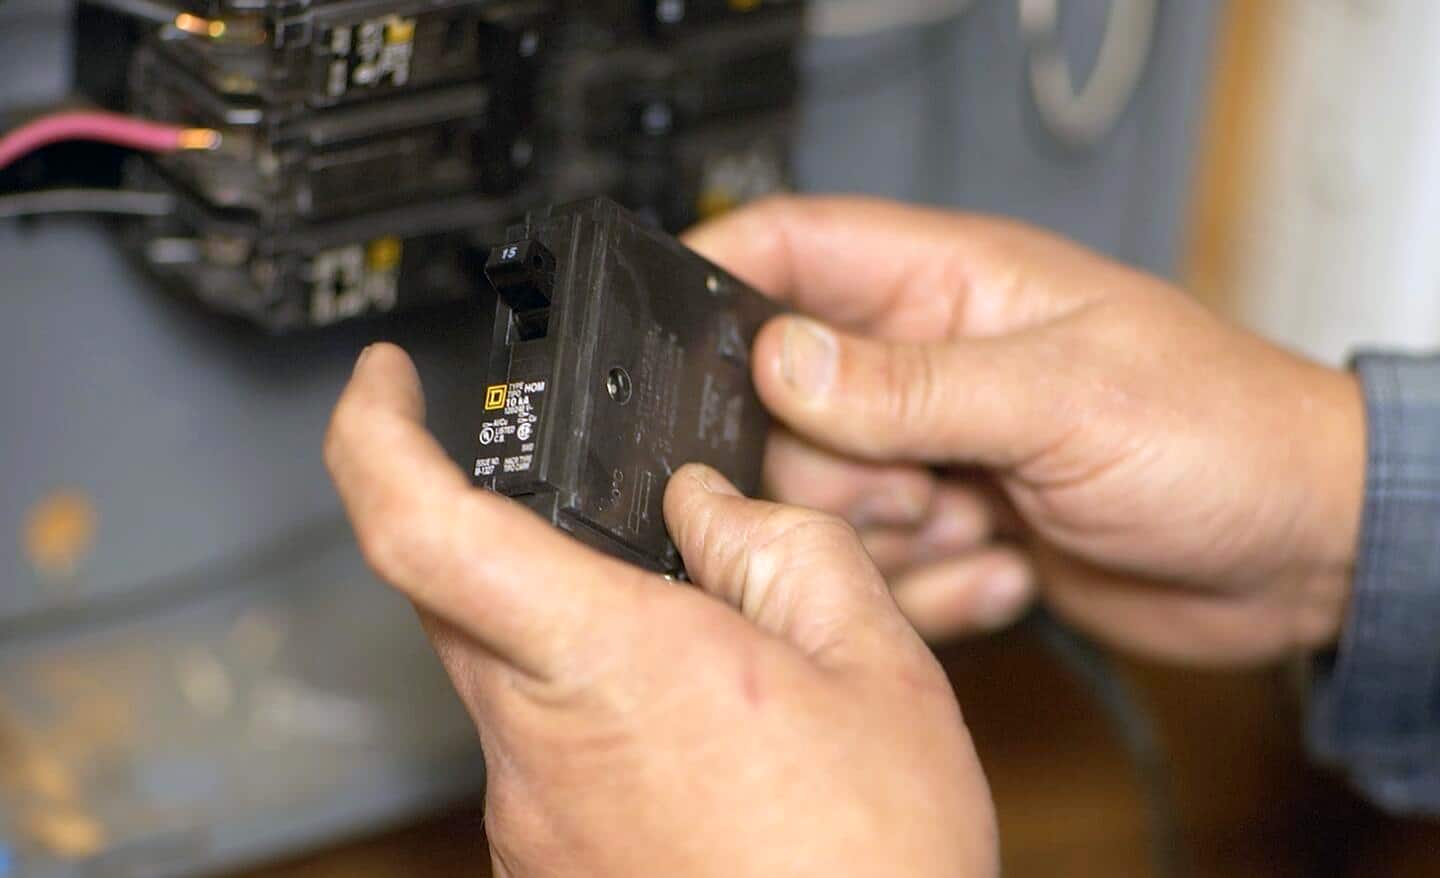 A person replacing a circuit breaker in an electrical panel.